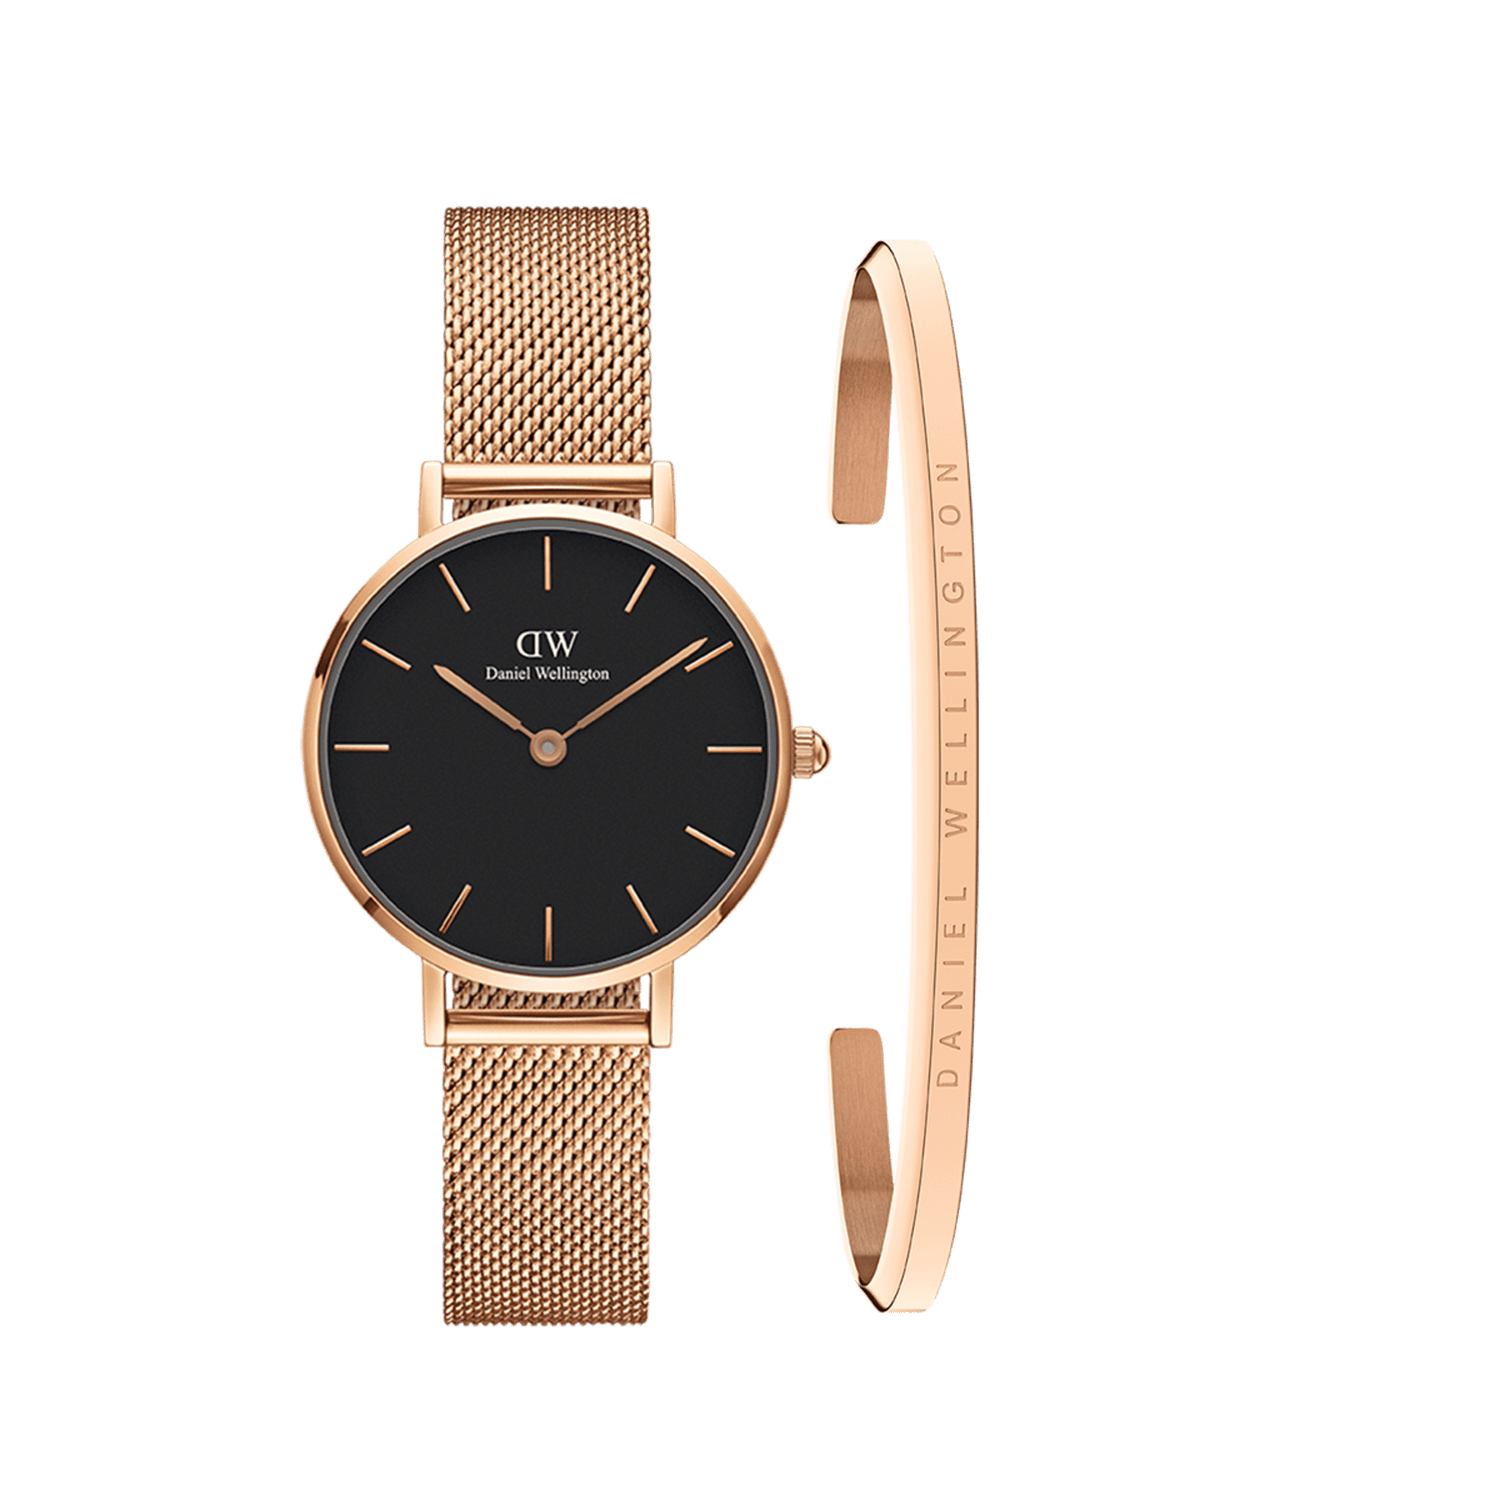 Women's Watches - Watches in Silver, Gold & Rose Gold | DW